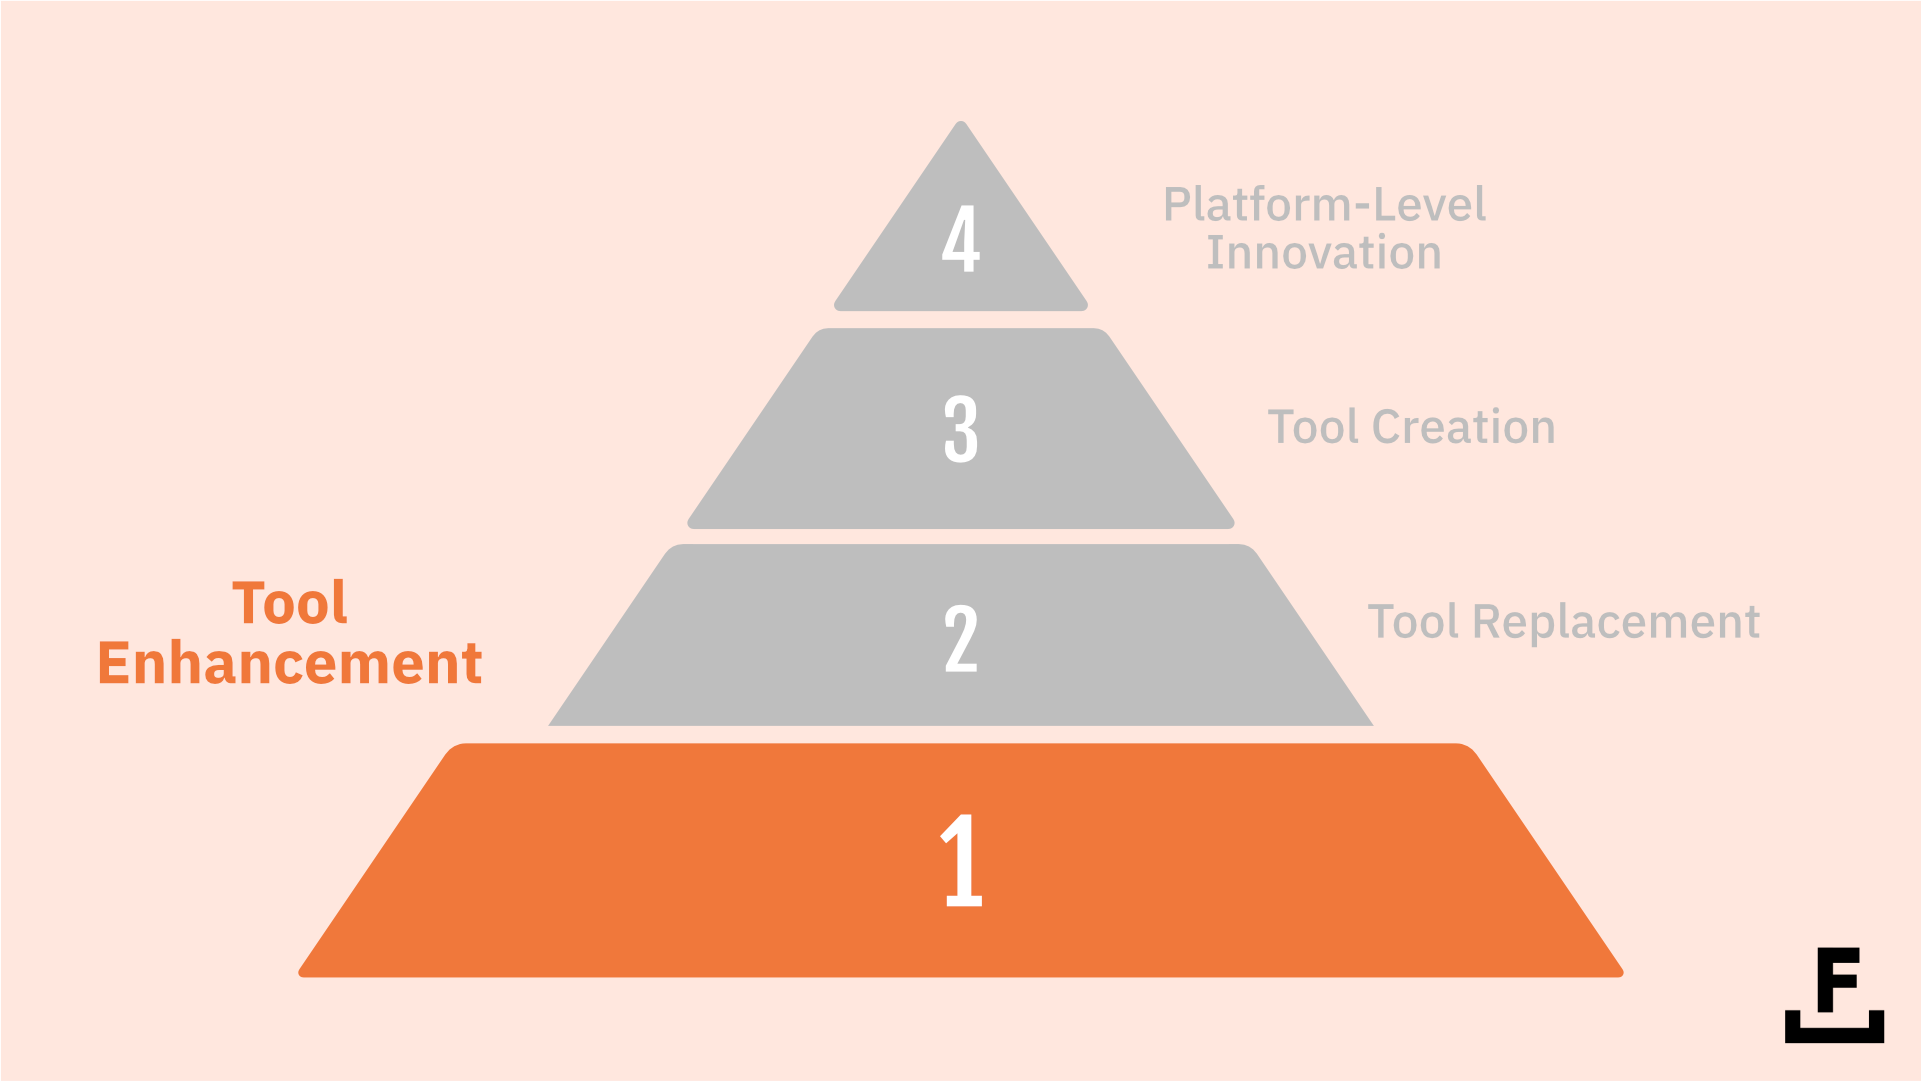 A pyramid of types of AI tools, highlighting the “Tool Enhancement” level.